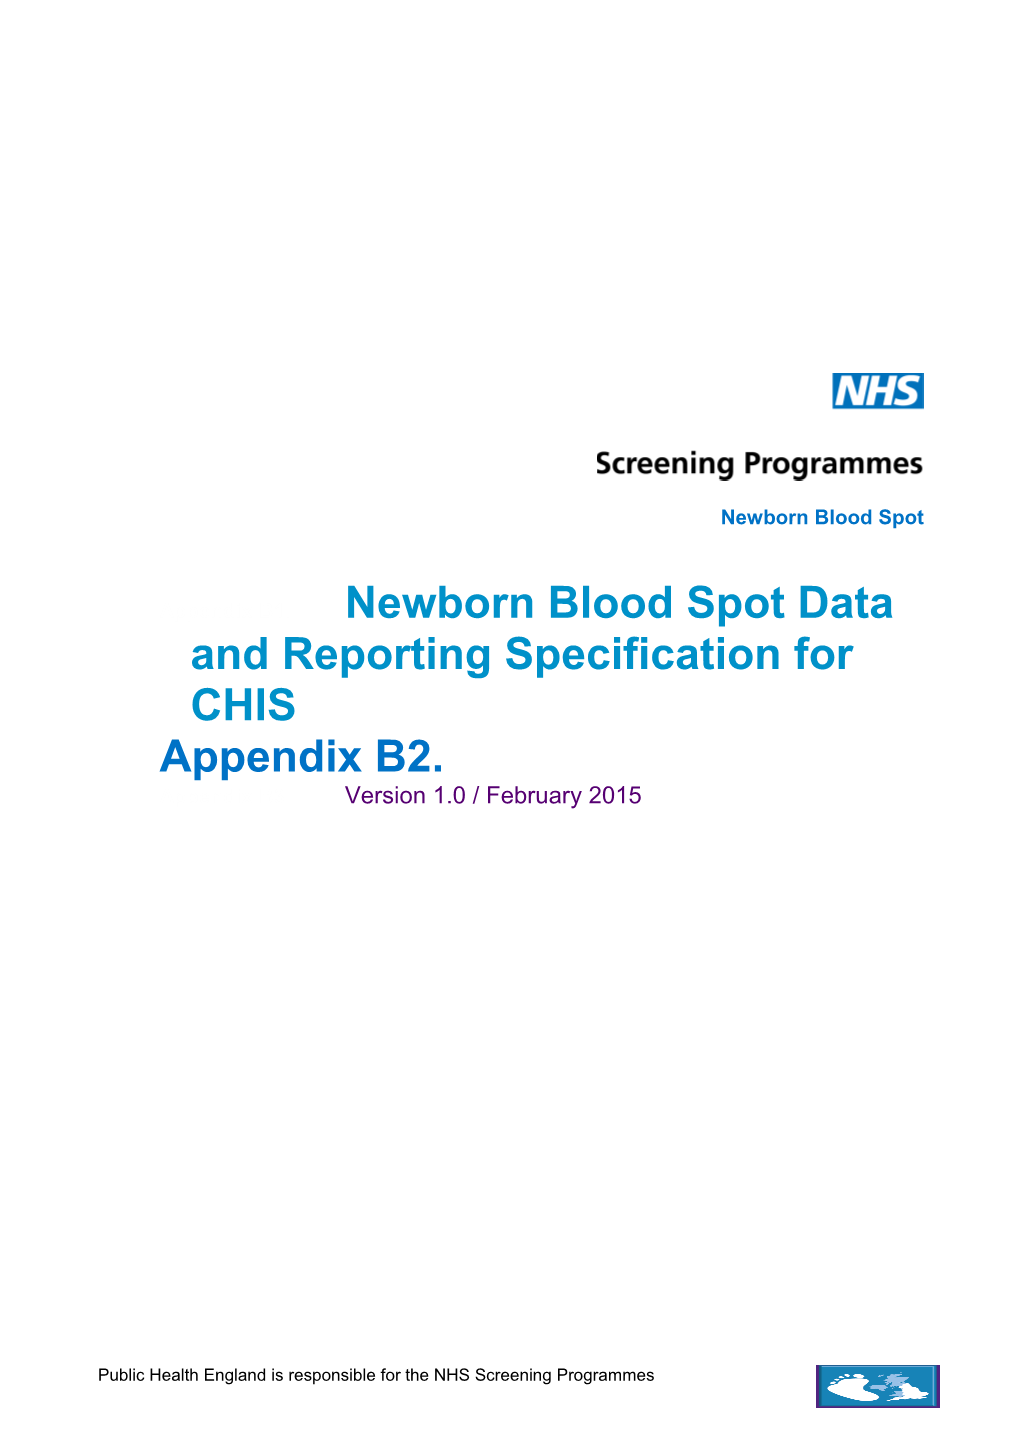 Newborn Blood Spot Data and Reporting Specification for CHIS